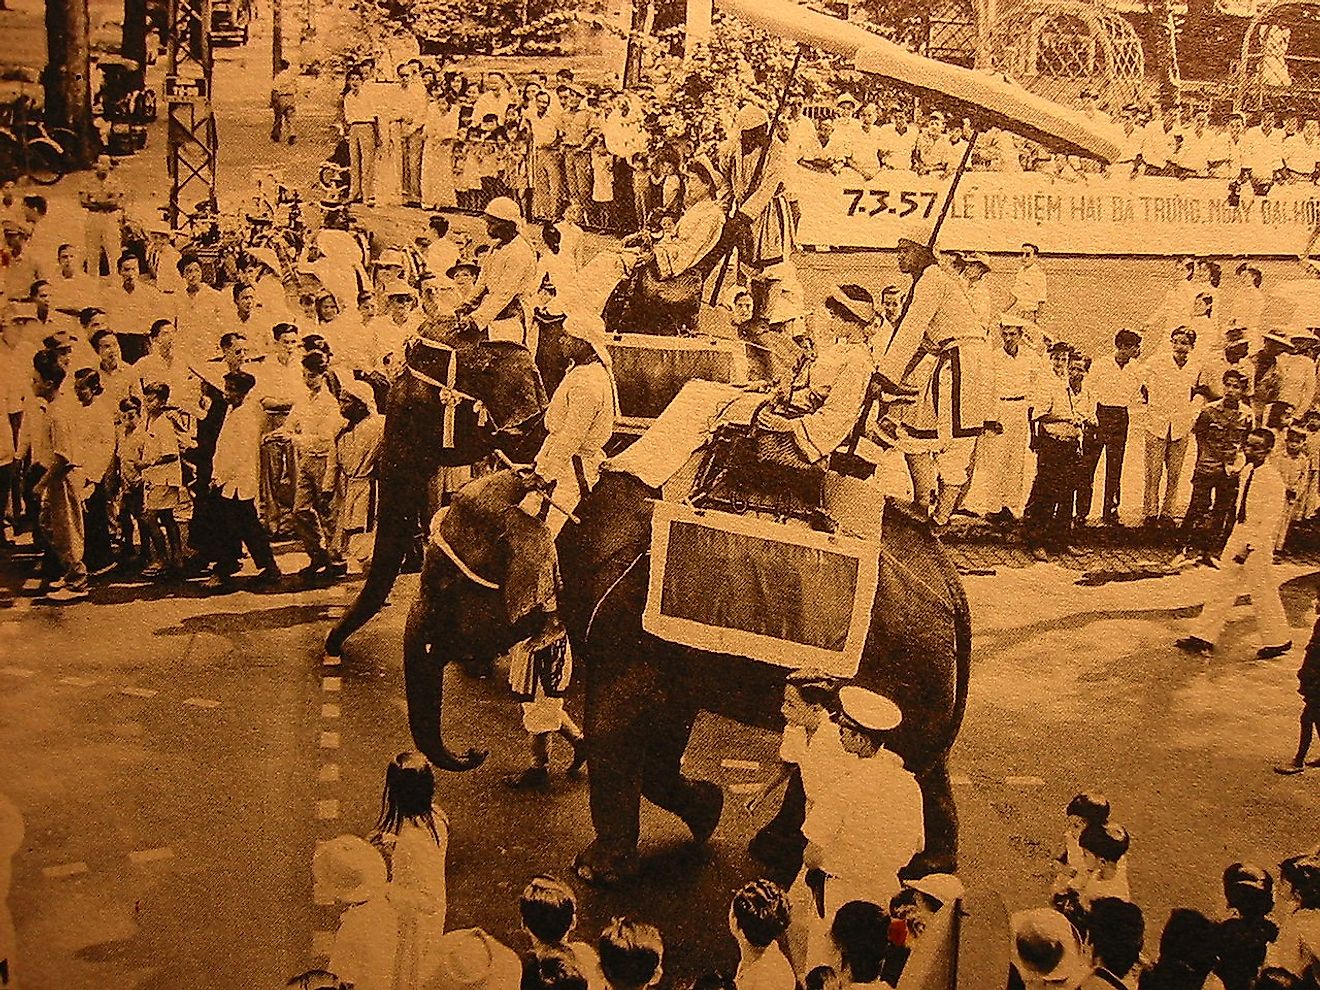 Procession of elephants in the Trưng Sisters' Parade in Saigon, 1957. Image credit: Press and Information Office, Embassy of the Republic of Vietnam / Public domain